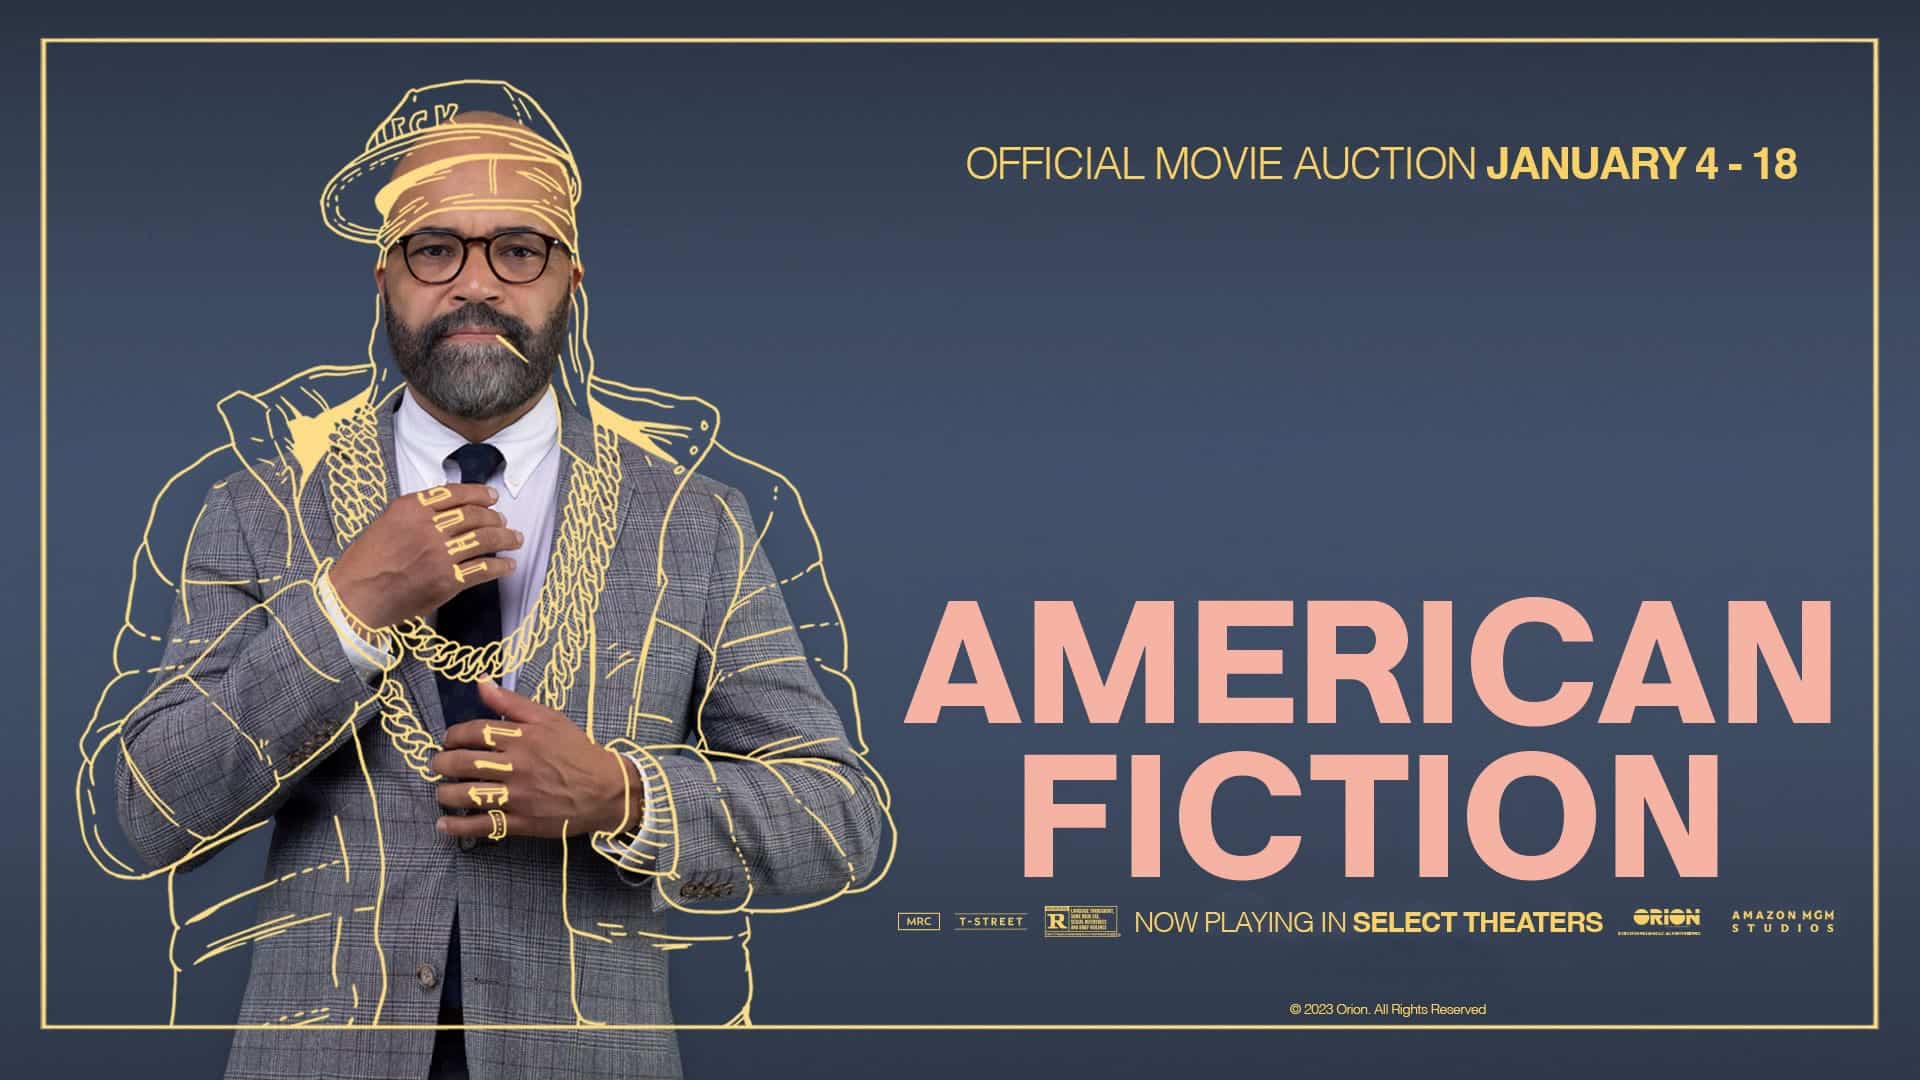 American-Fiction-movie-auction-Jan4-11-VIPFanAuctions-over-300-million-box-office